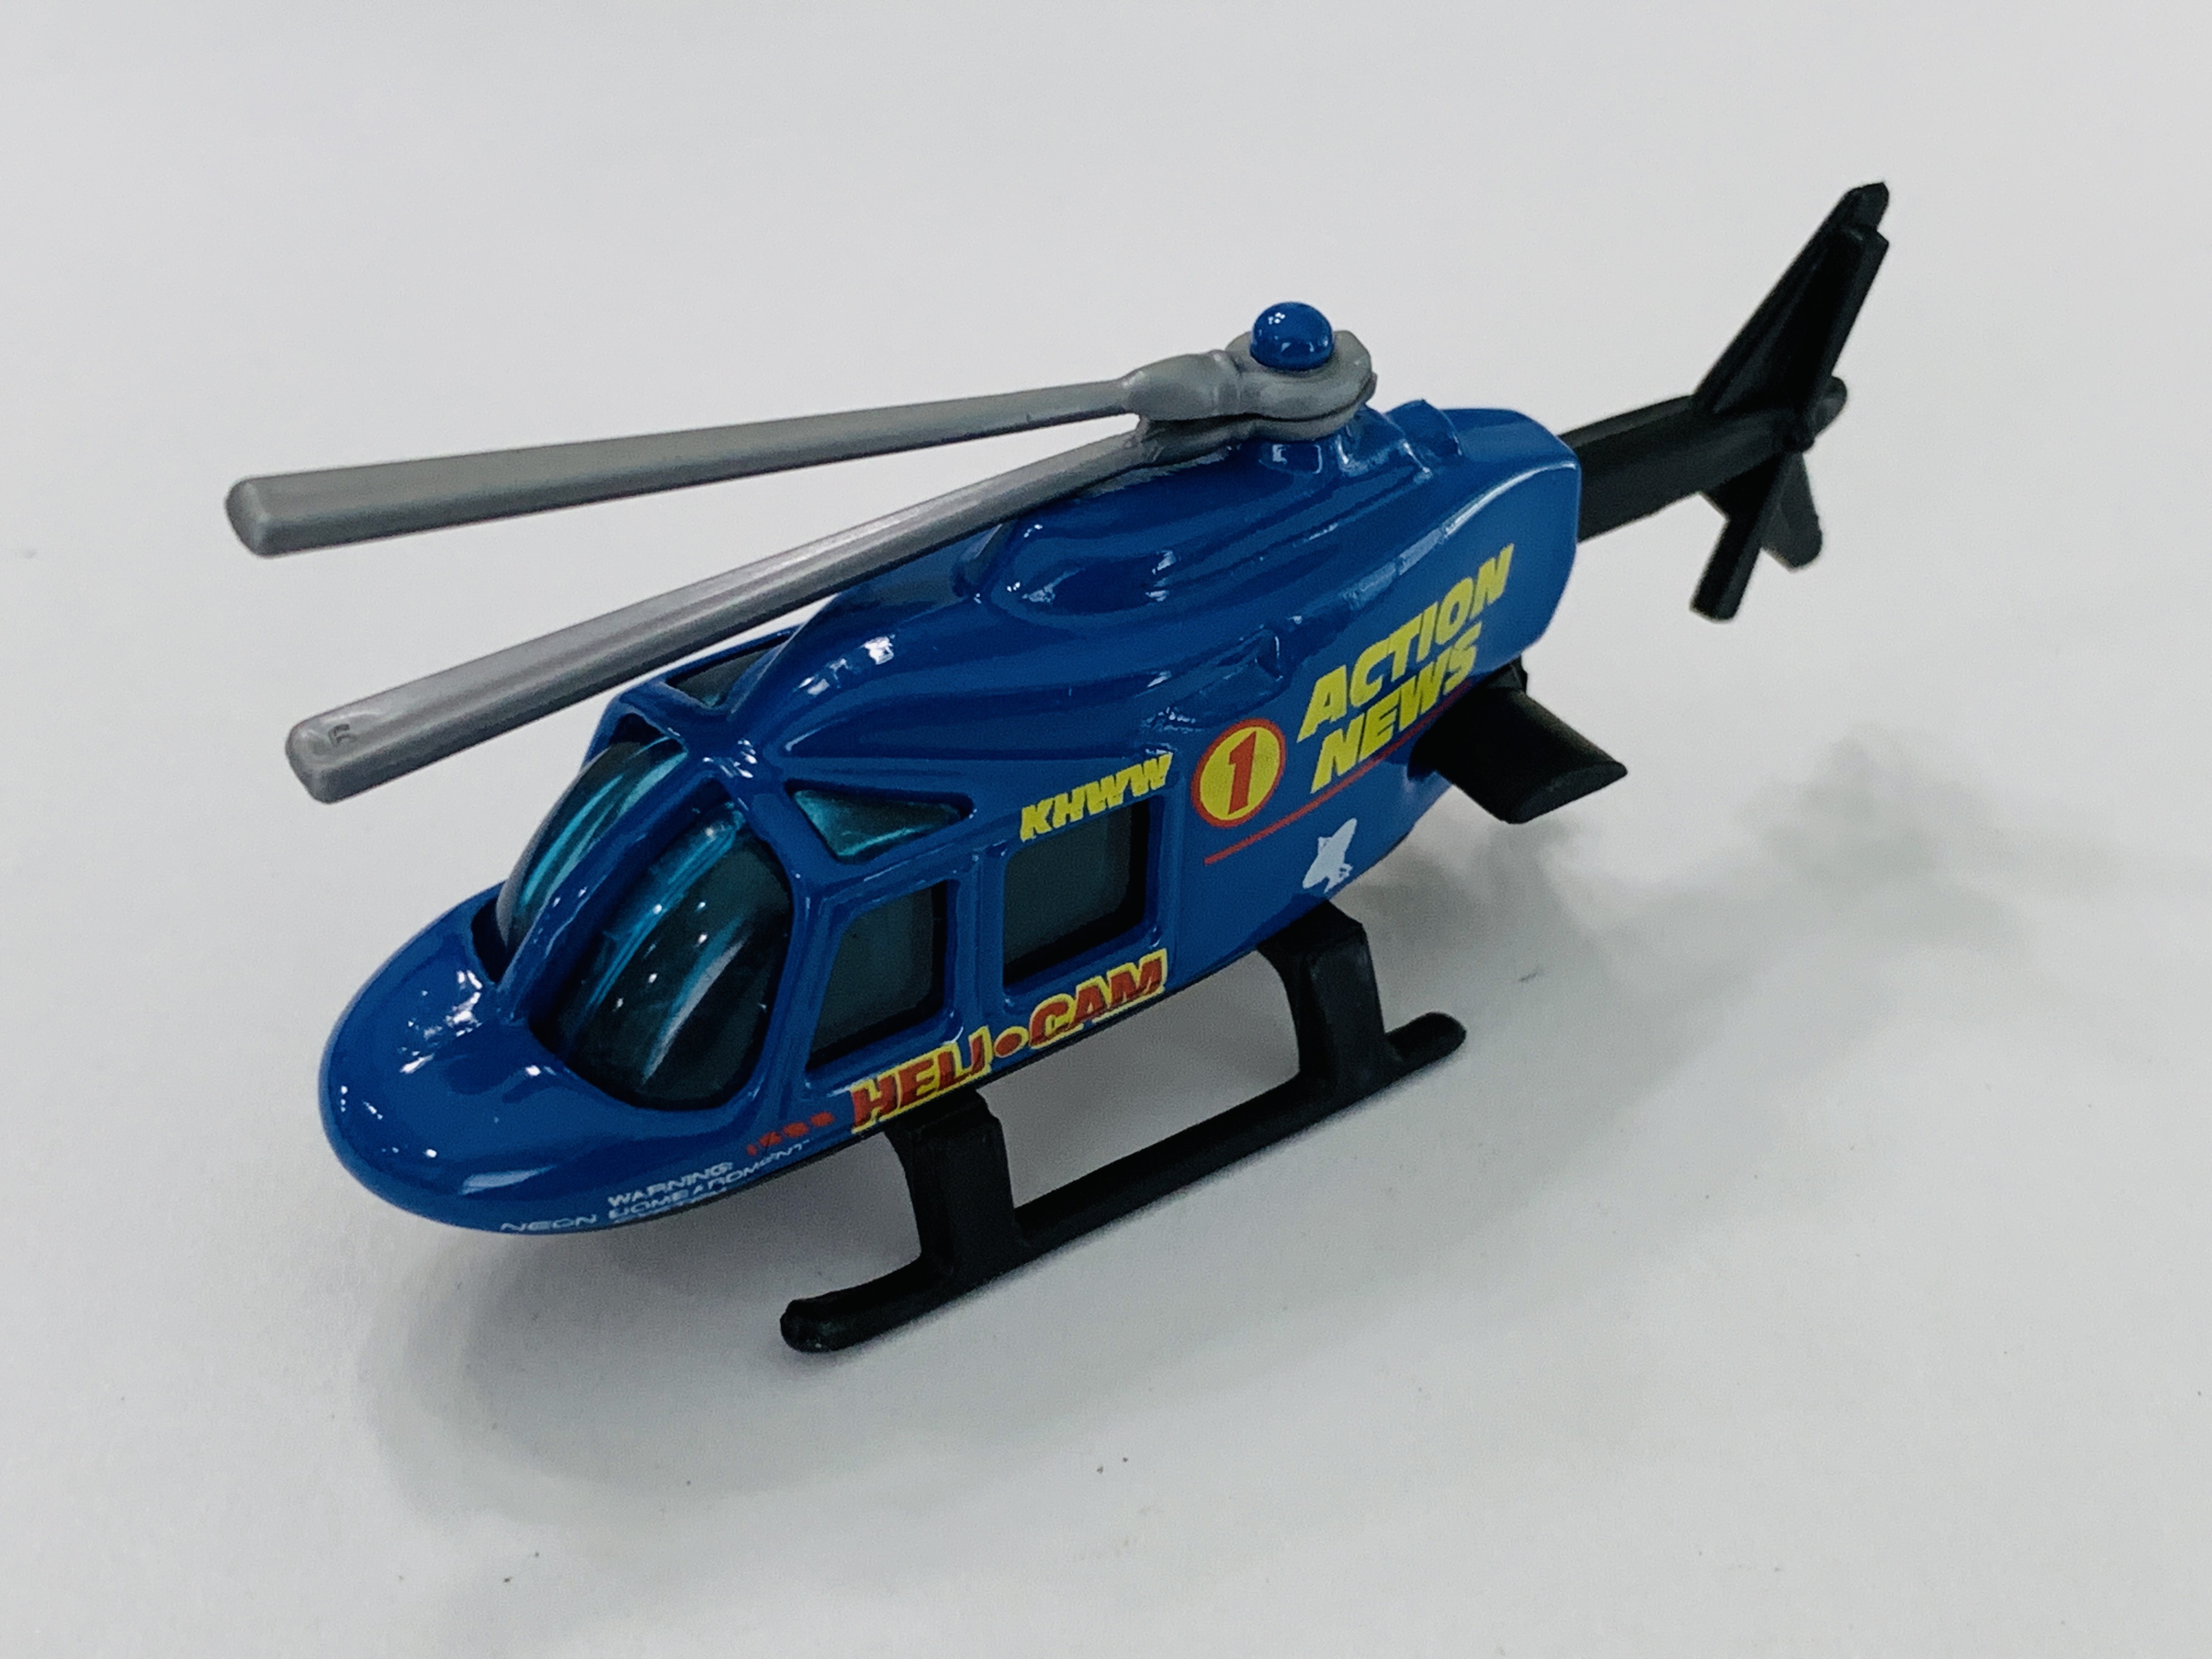 Hot Wheels Action News Propper Chopper - 5 Pack Exclusive